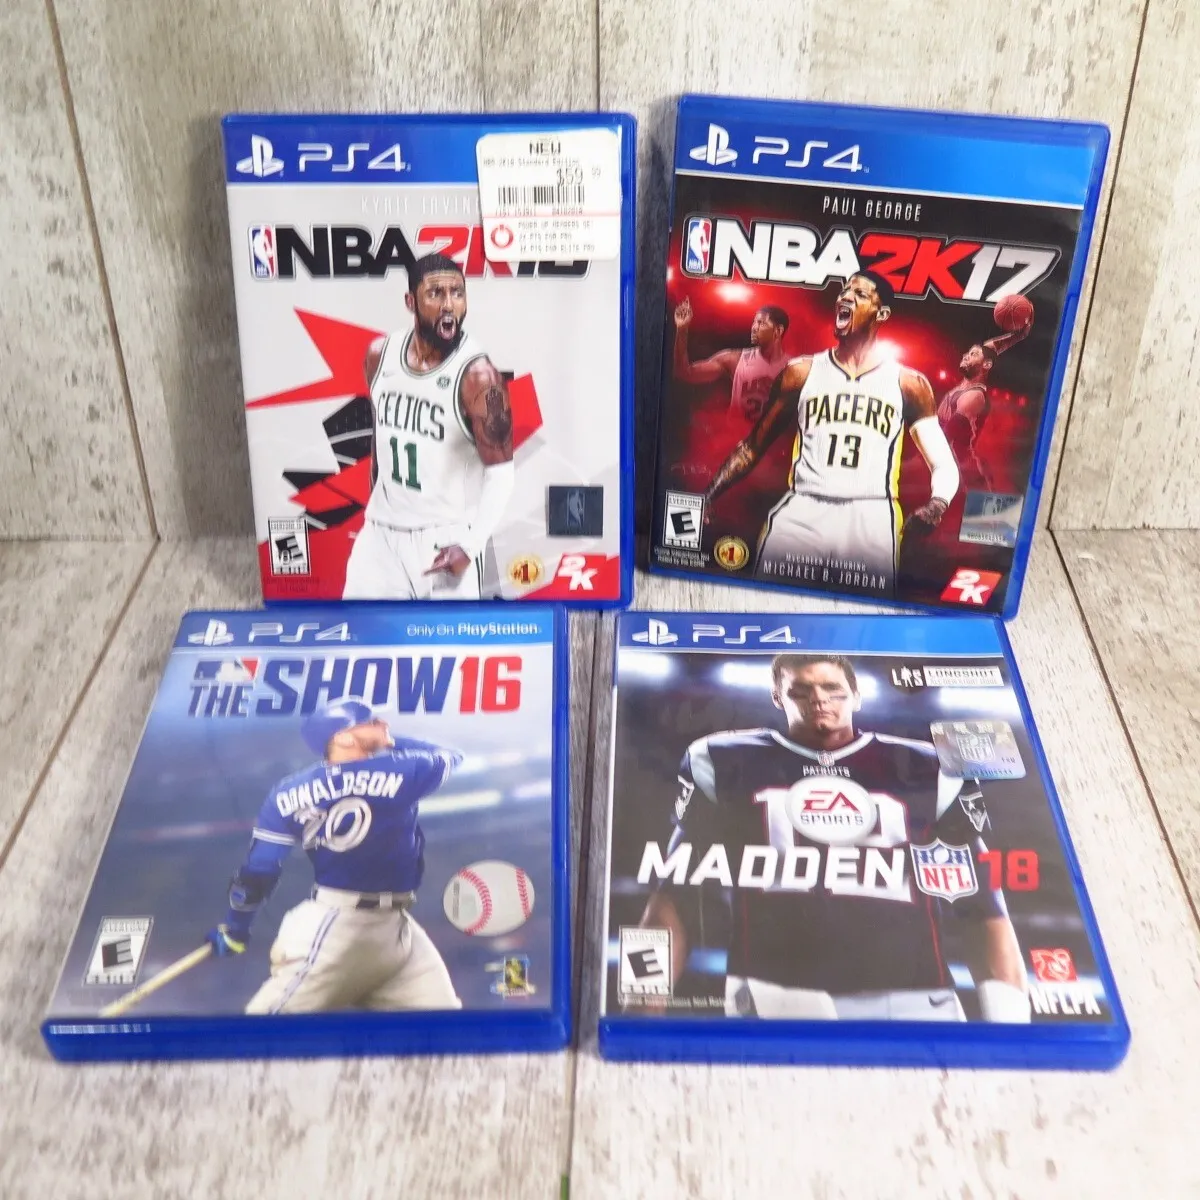 Lot of 4 PS4 Sports Games NBA 2K17, 18 Madden 18, Show 16 | eBay